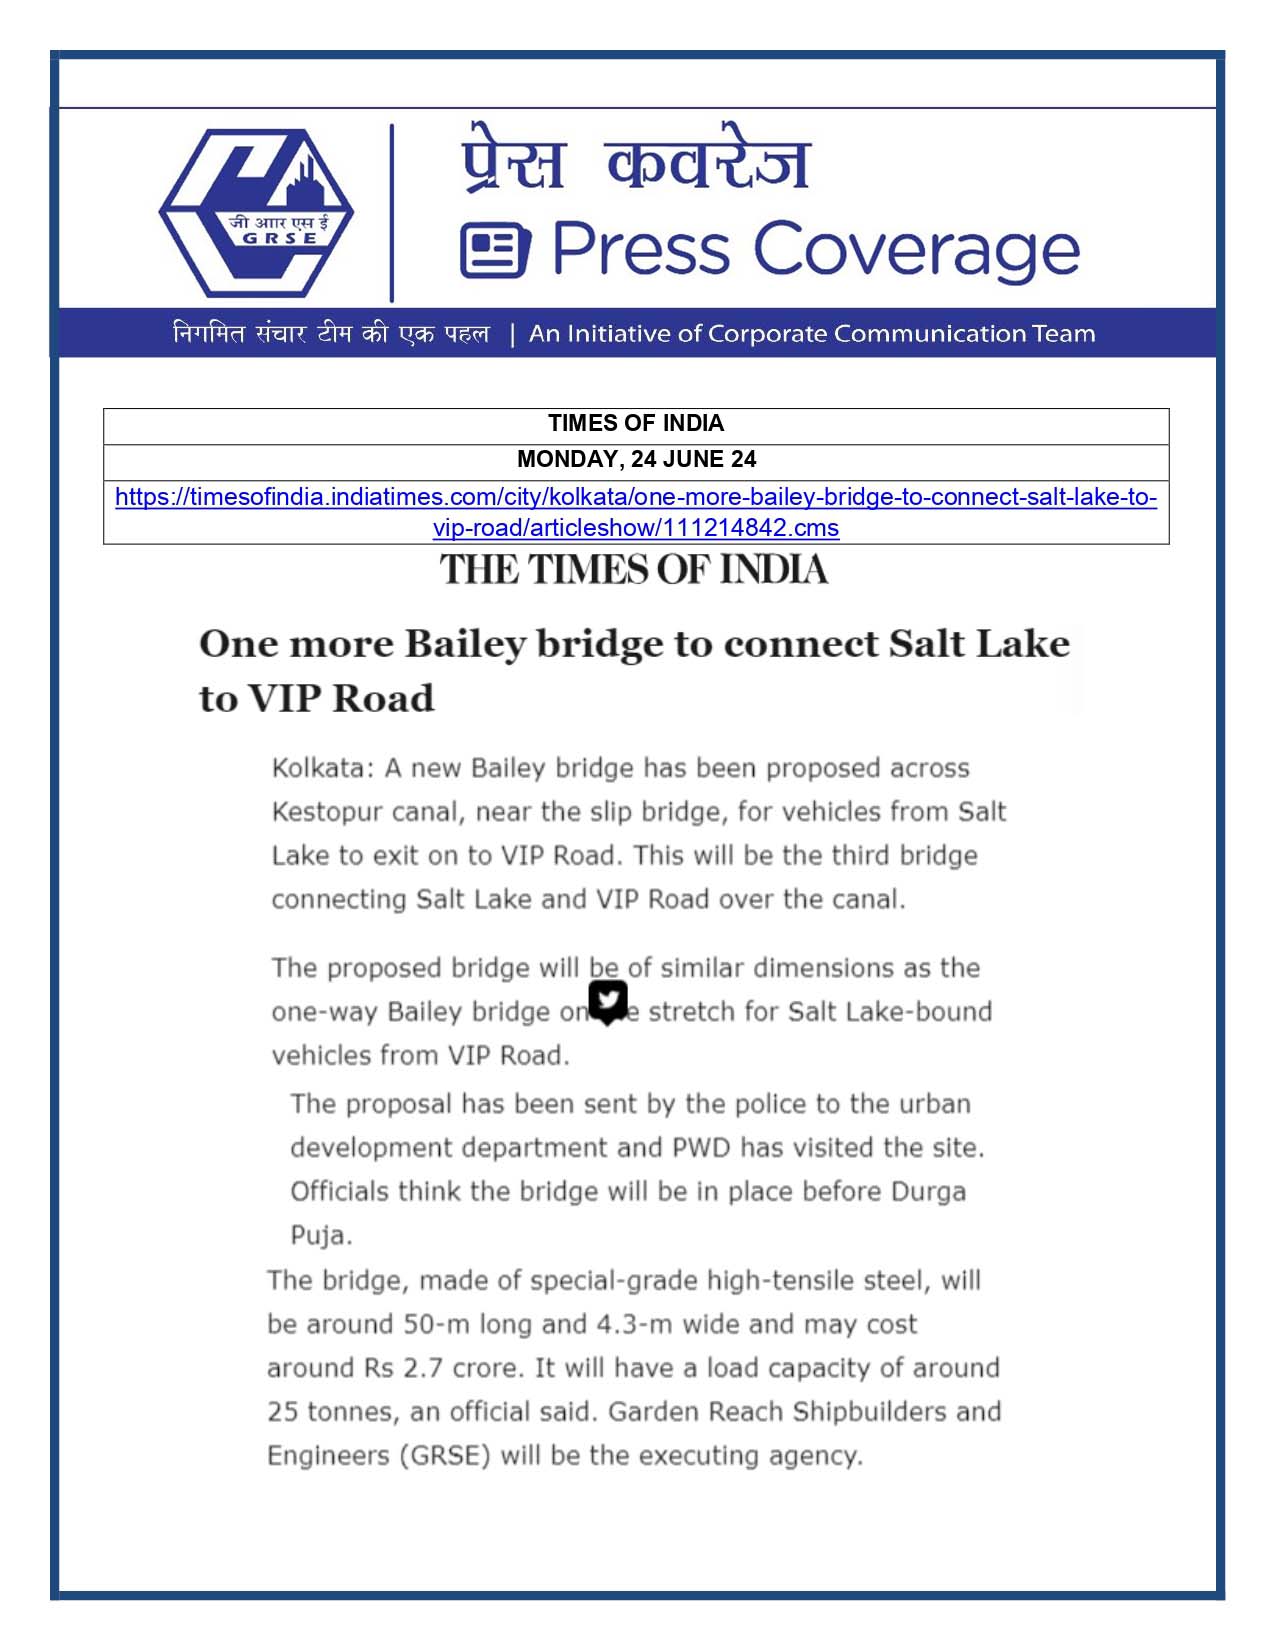 Press Coverage : Times of India, 24 Jun 24 : One more Bailey Bridge to connect Salt Lake to VIP Road